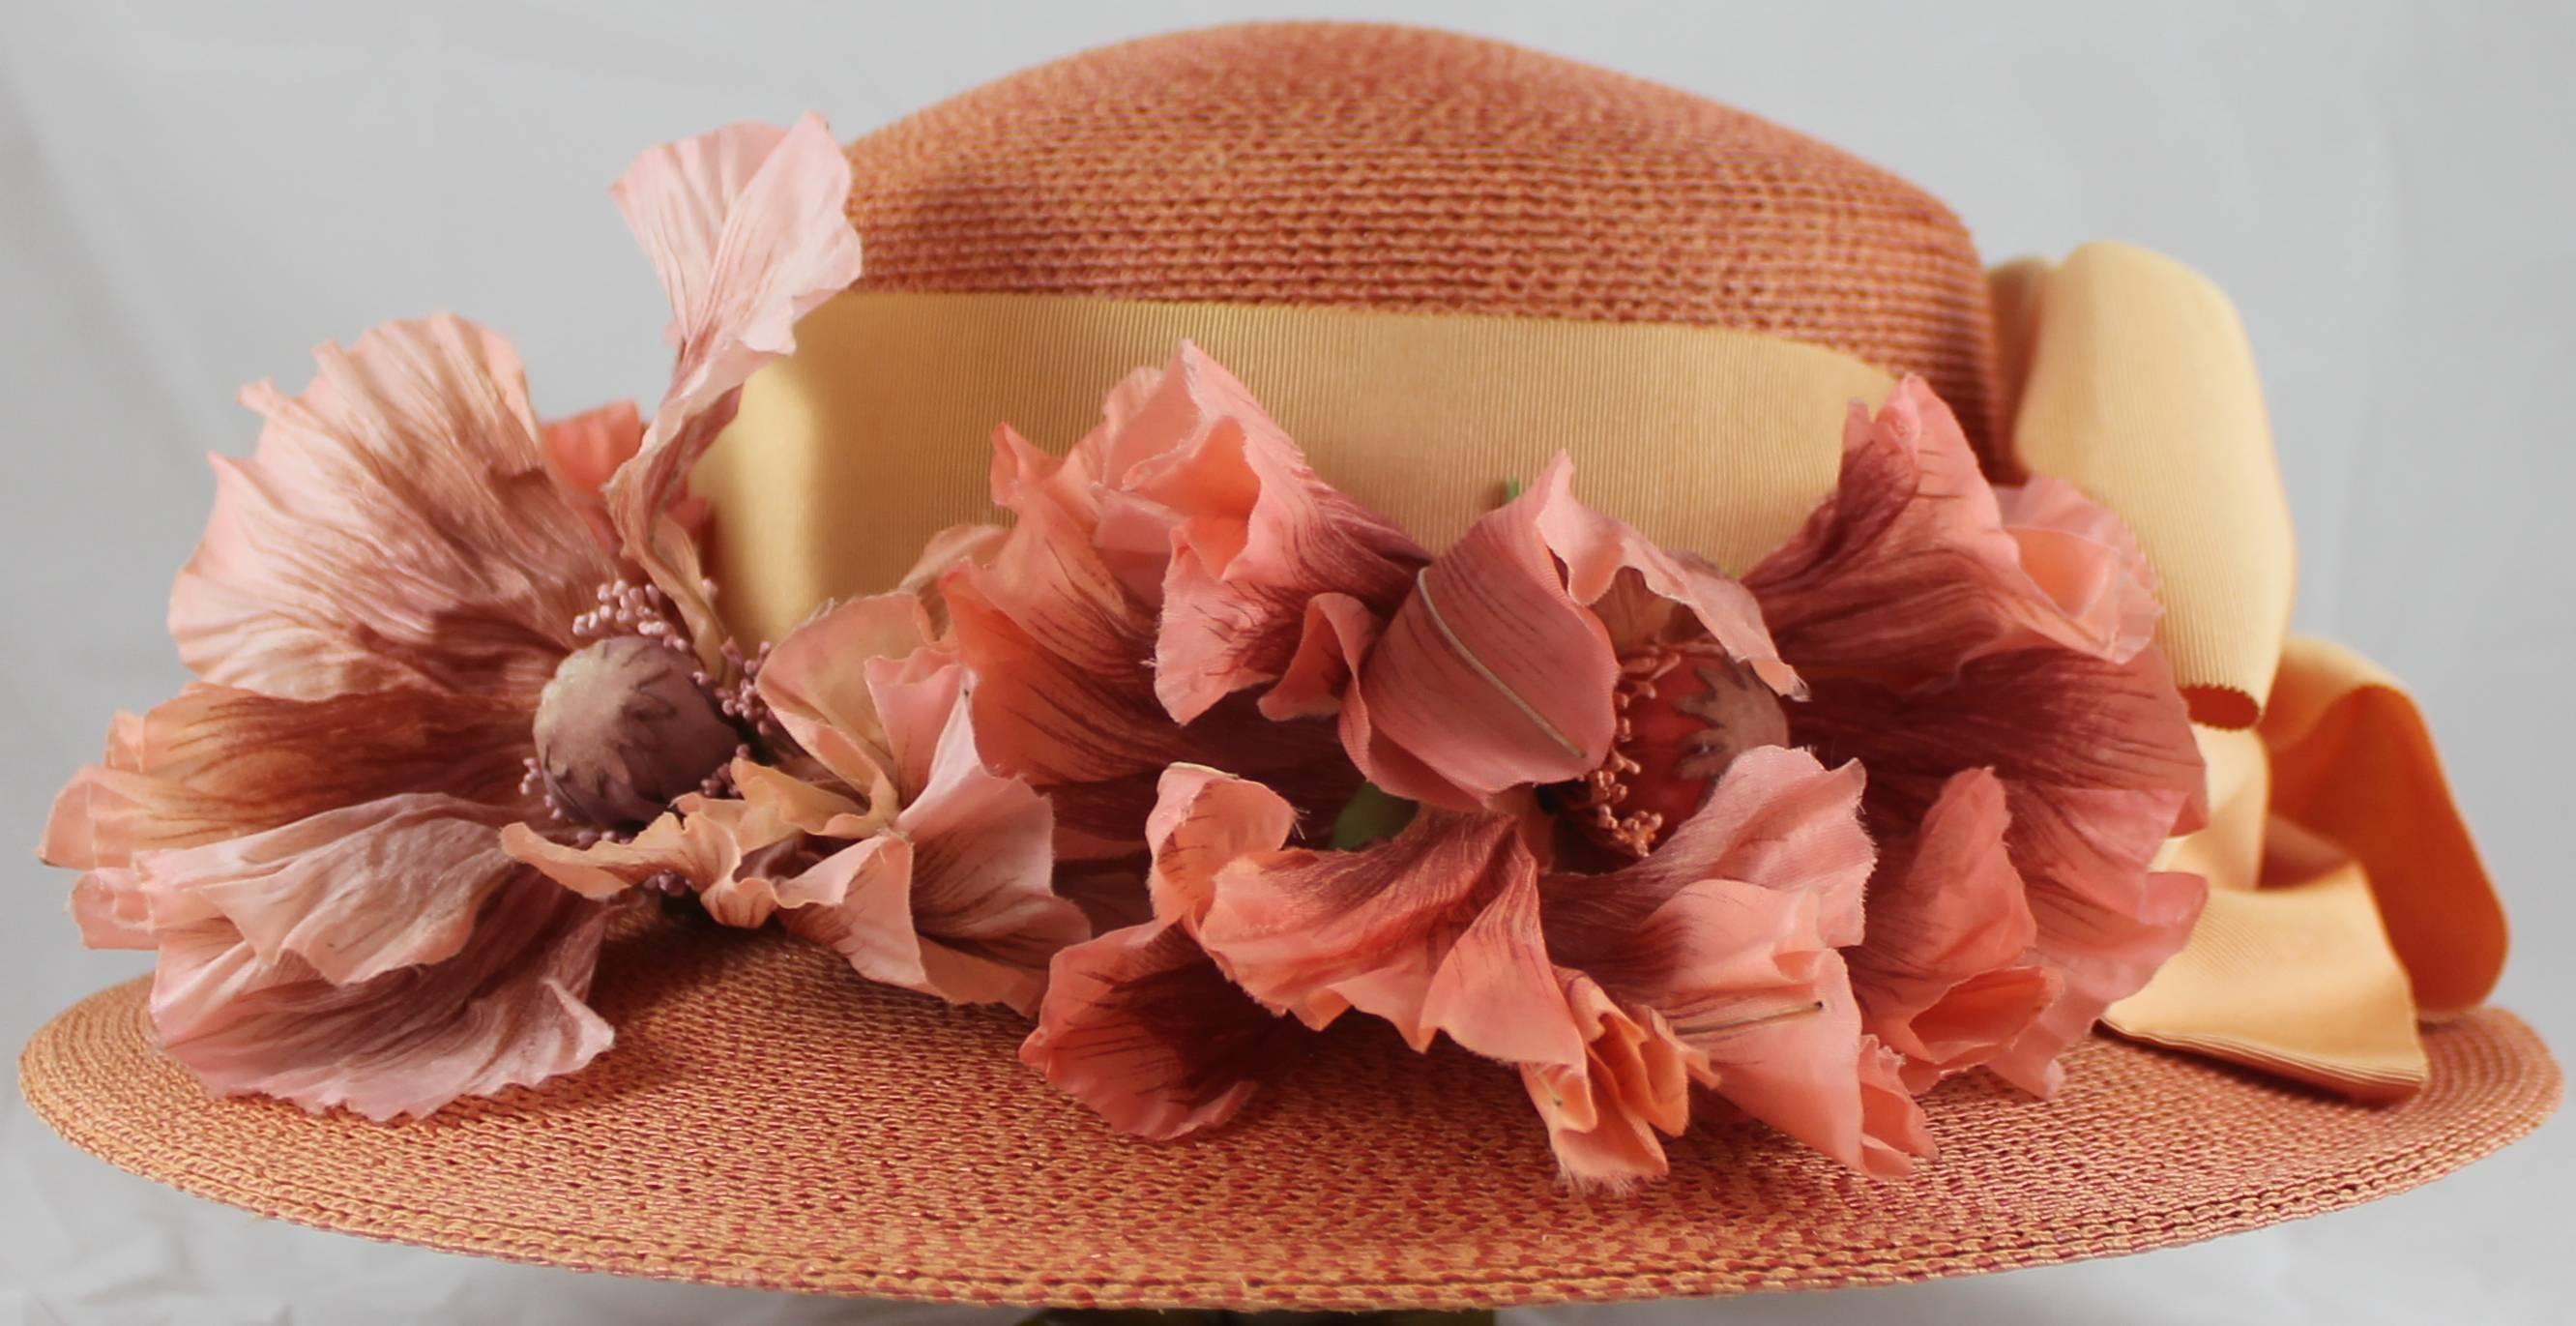 Suzanne Custom Millinery Salmon Round Brim Hat with Large Flowers and Ribbon. This round brim hat is salmon colored and has large pink flowers. There is a melon colored ribbon and a large bow. It is in excellent condition with a very small stain on